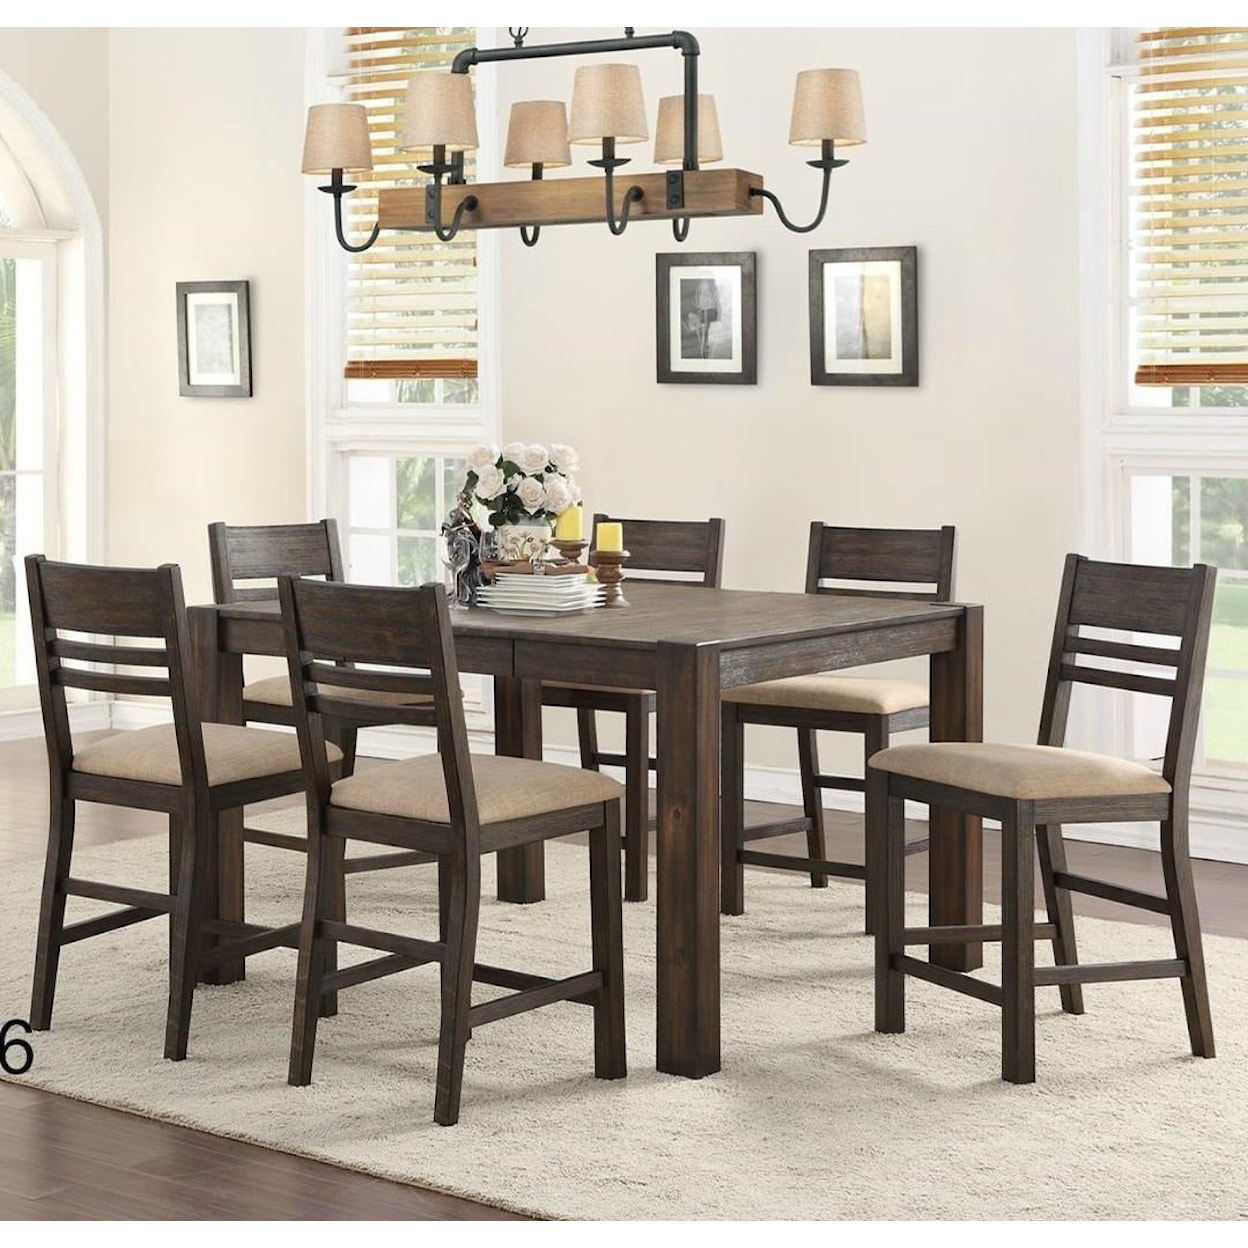 Holland House 1106 7-Piece Counter Table Set